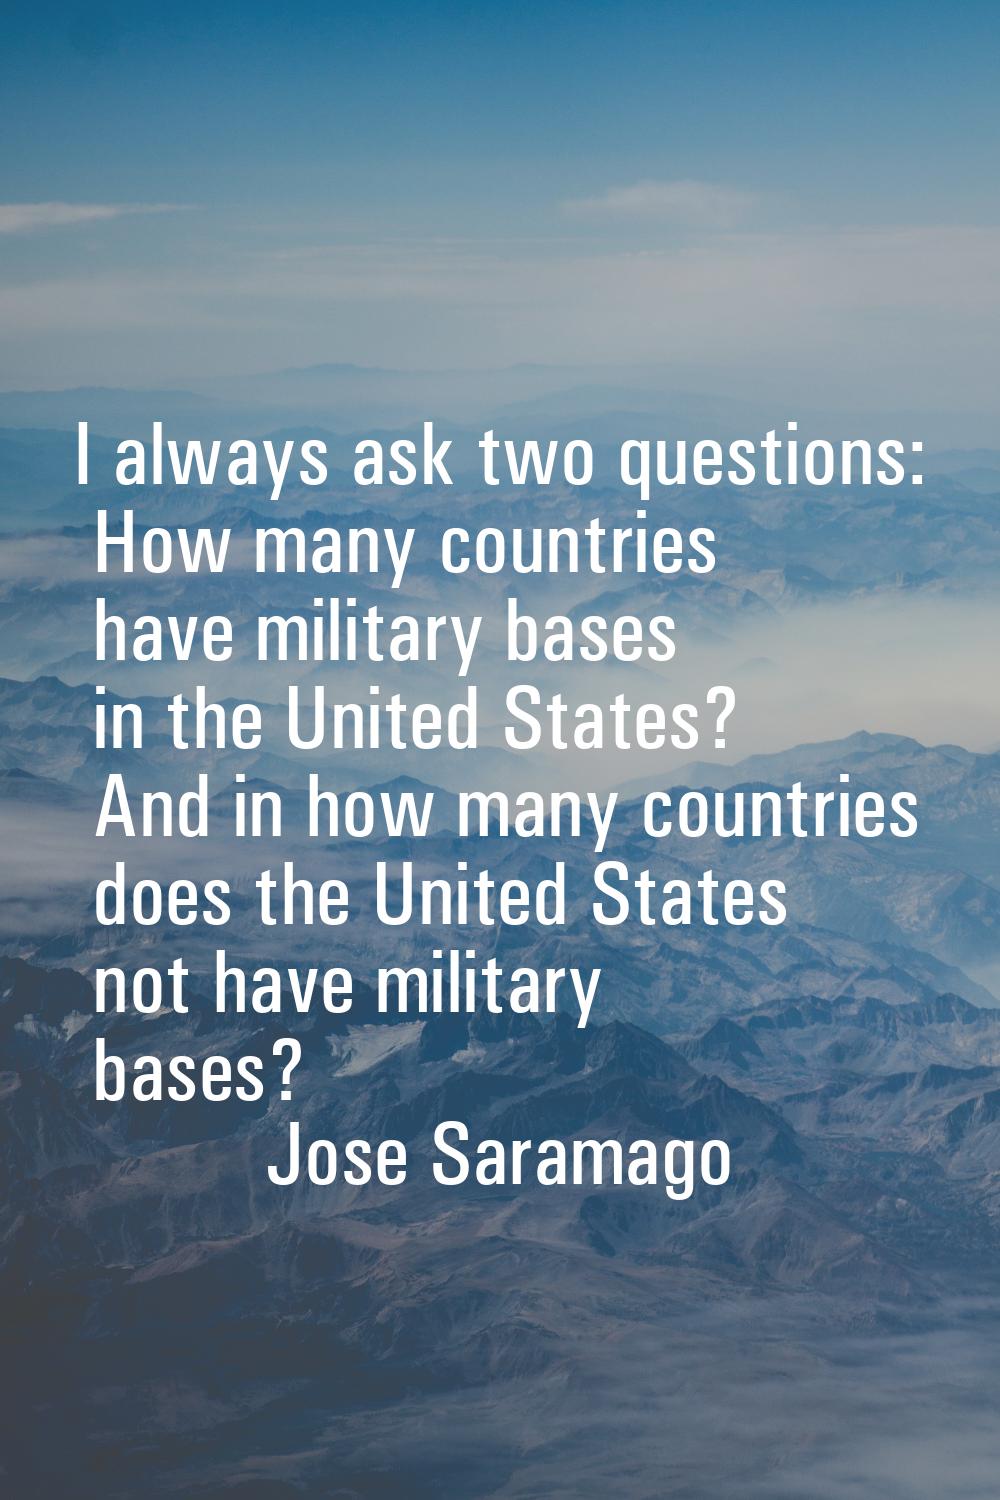 I always ask two questions: How many countries have military bases in the United States? And in how